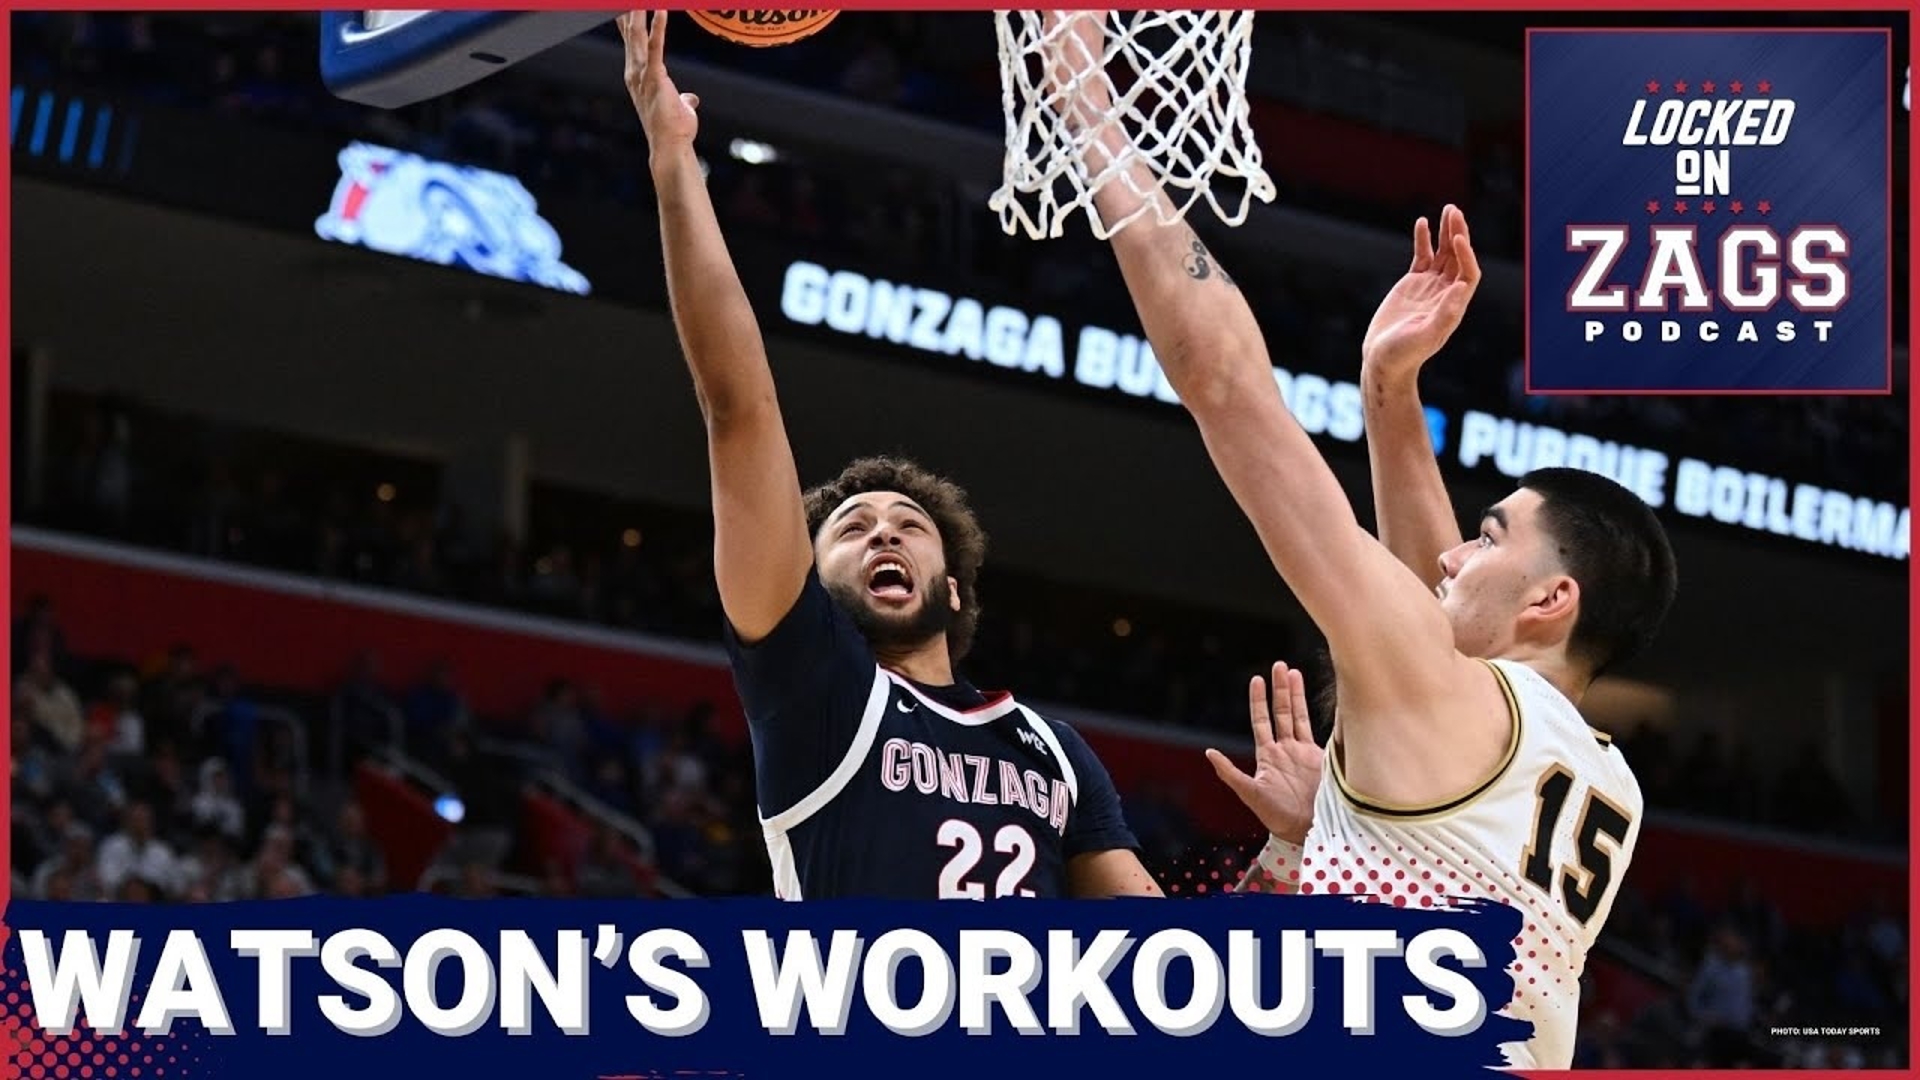 Gonzaga Bulldogs forward Anton Watson has worked out for seven different NBA teams, with one week remaining until the NBA draft begins.